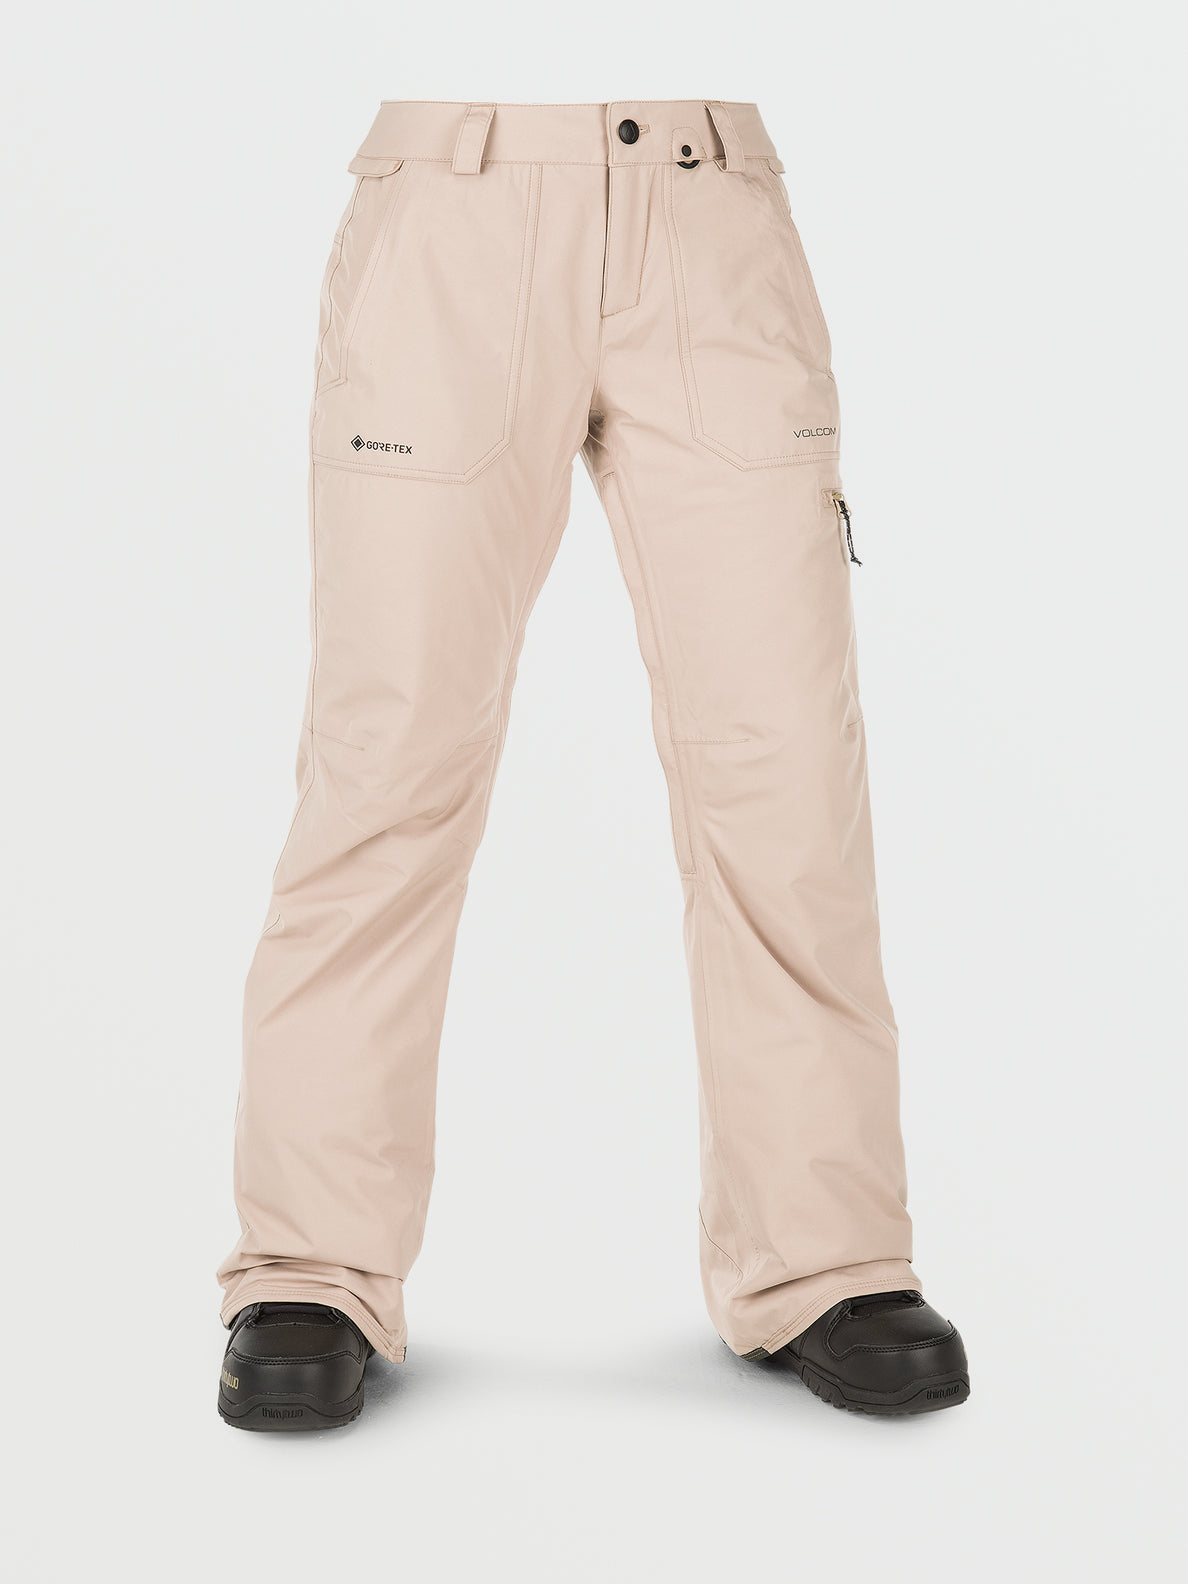 Womens Knox Insulated Gore-Tex Pants - Sand (H1252301_SAN) [5]